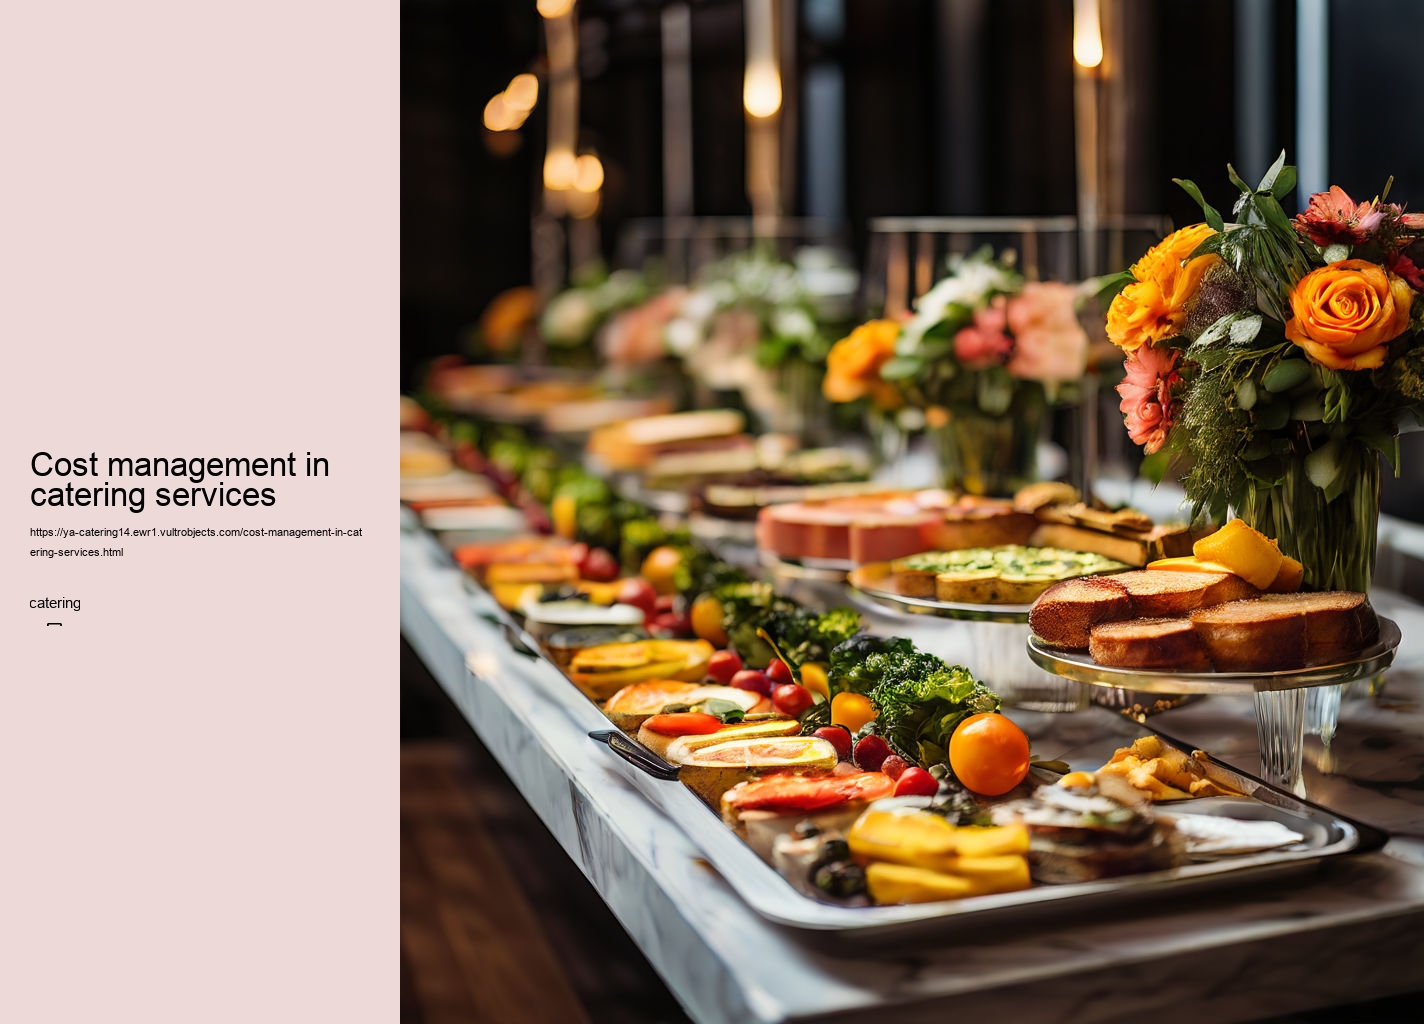 Cost management in catering services